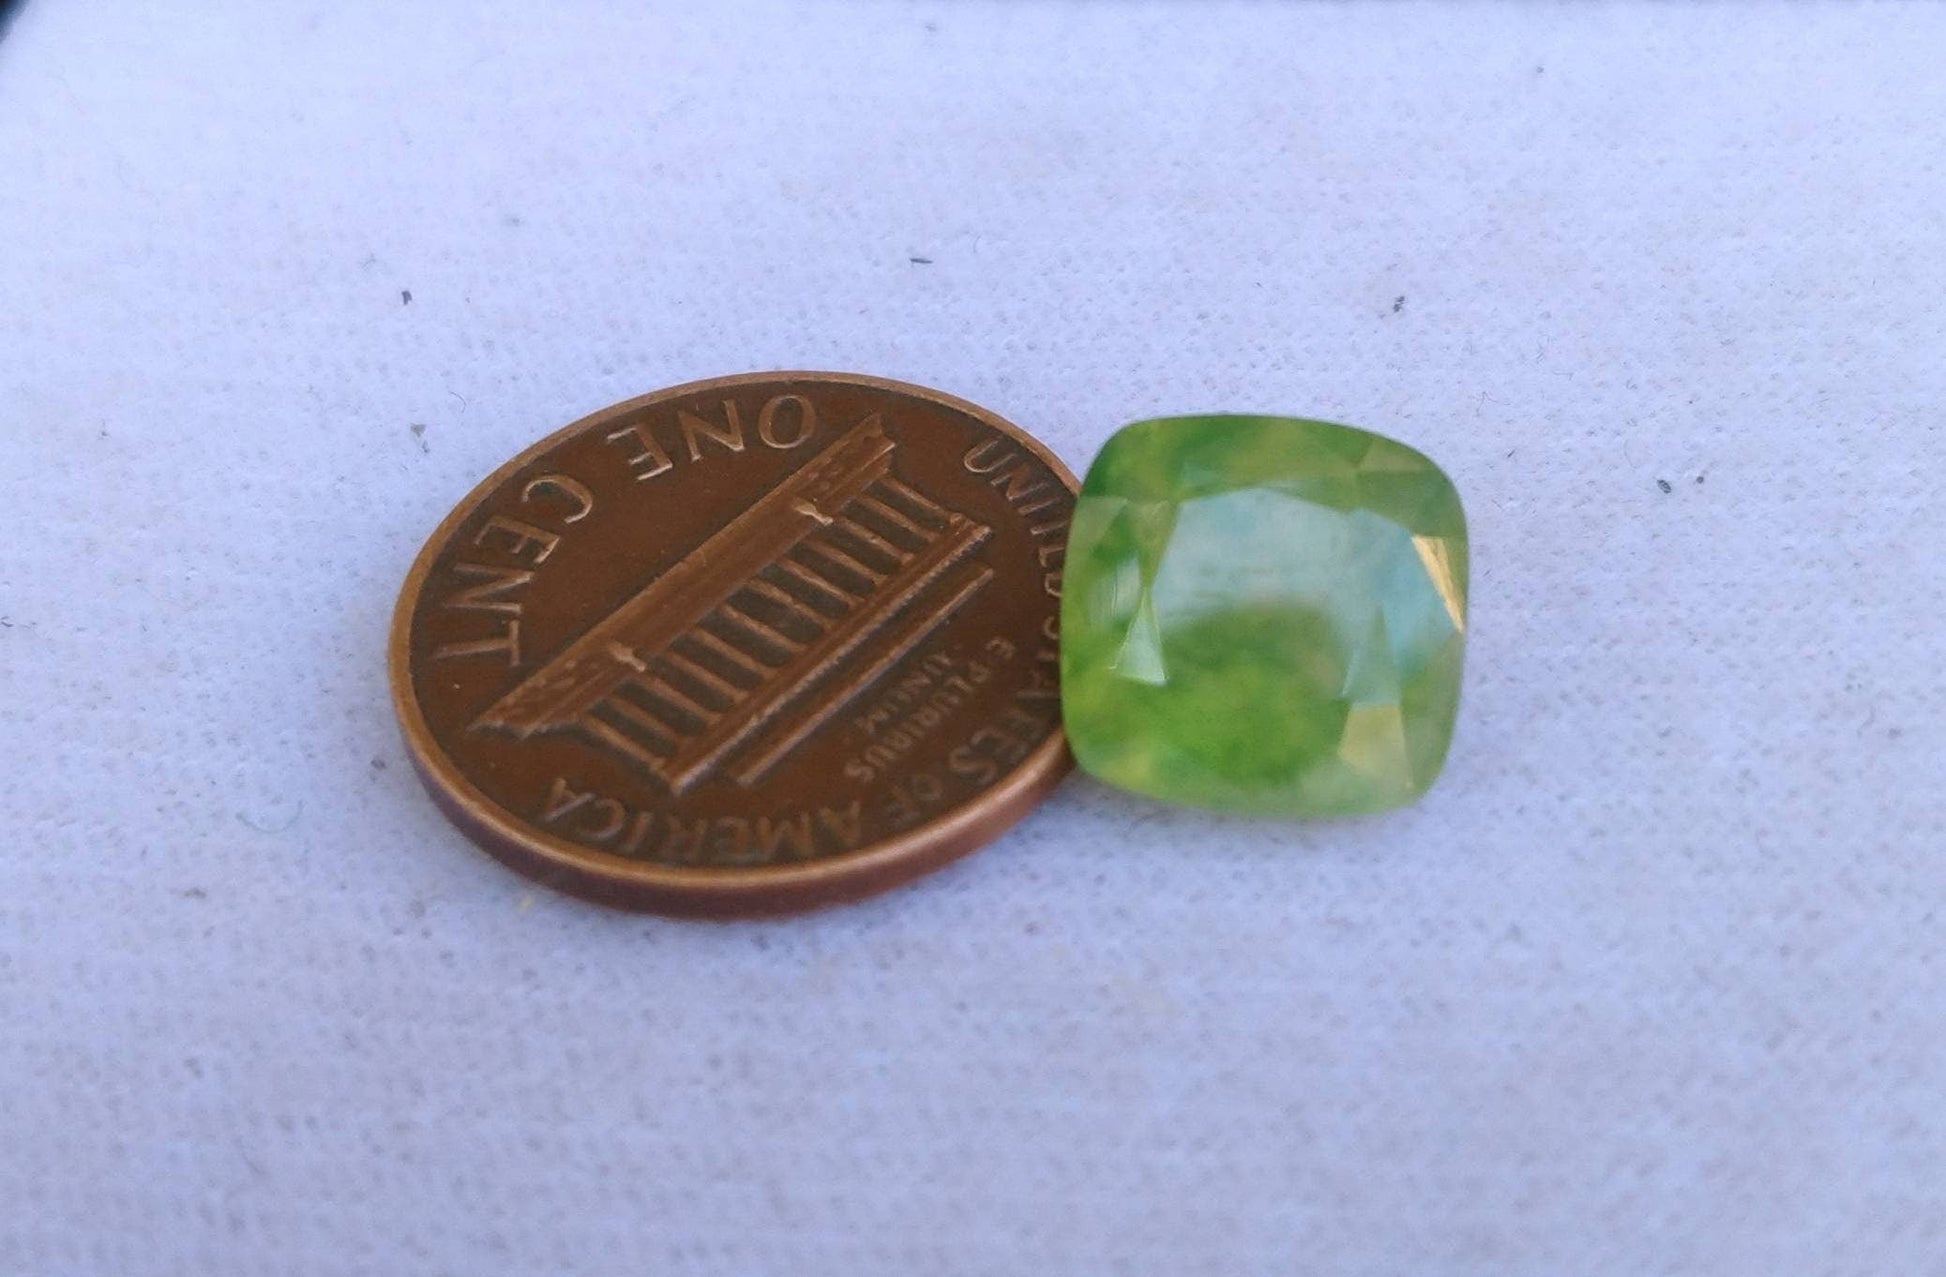 ARSAA GEMS AND MINERALSNatural top quality beautiful 4.5 carats square shape faceted green hydrograssular garnet gem - Premium  from ARSAA GEMS AND MINERALS - Just $12.00! Shop now at ARSAA GEMS AND MINERALS